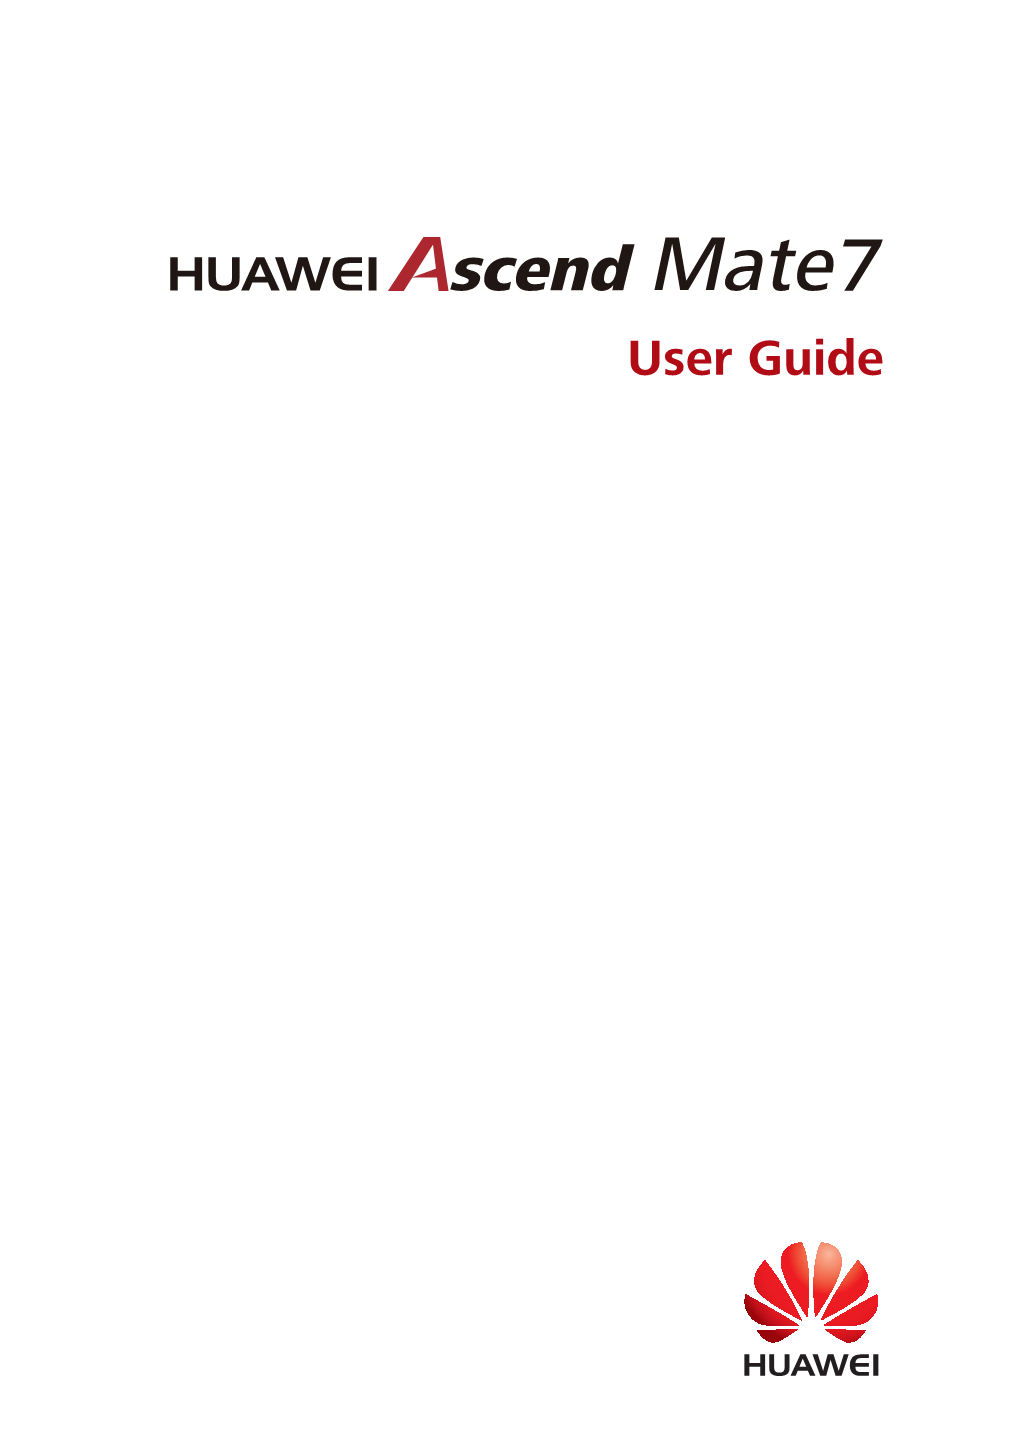 User Guide Contents